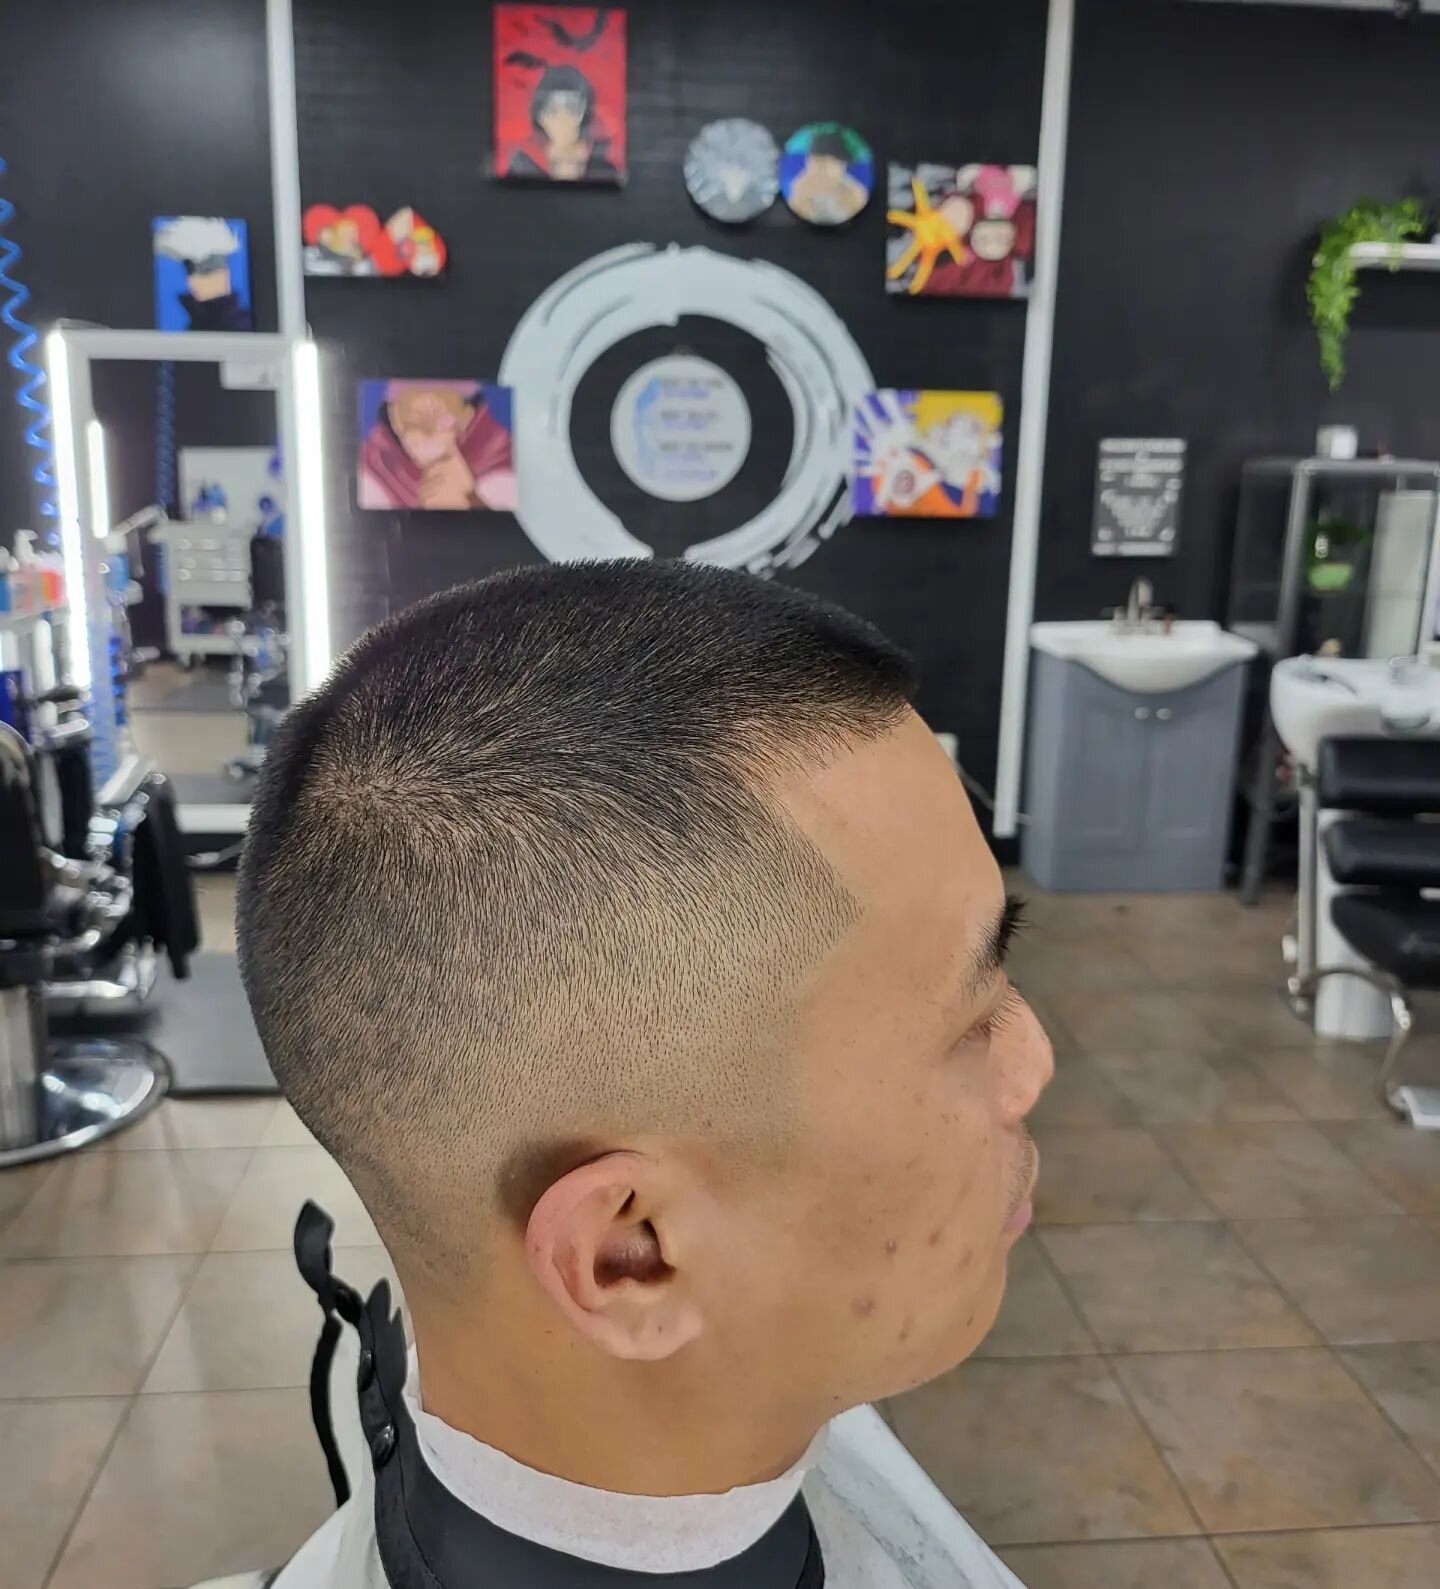 Haircut by @ellothebarber

Background our artwork by @simply.chassidy

Book your appointments! 
Walk-ins welcome
*******************
Zen Barbers
8121 Vineland Ave
Orlando, FL 32821
407-778-1616 
**************************
#ZenBarbers #Barberlife #Bar